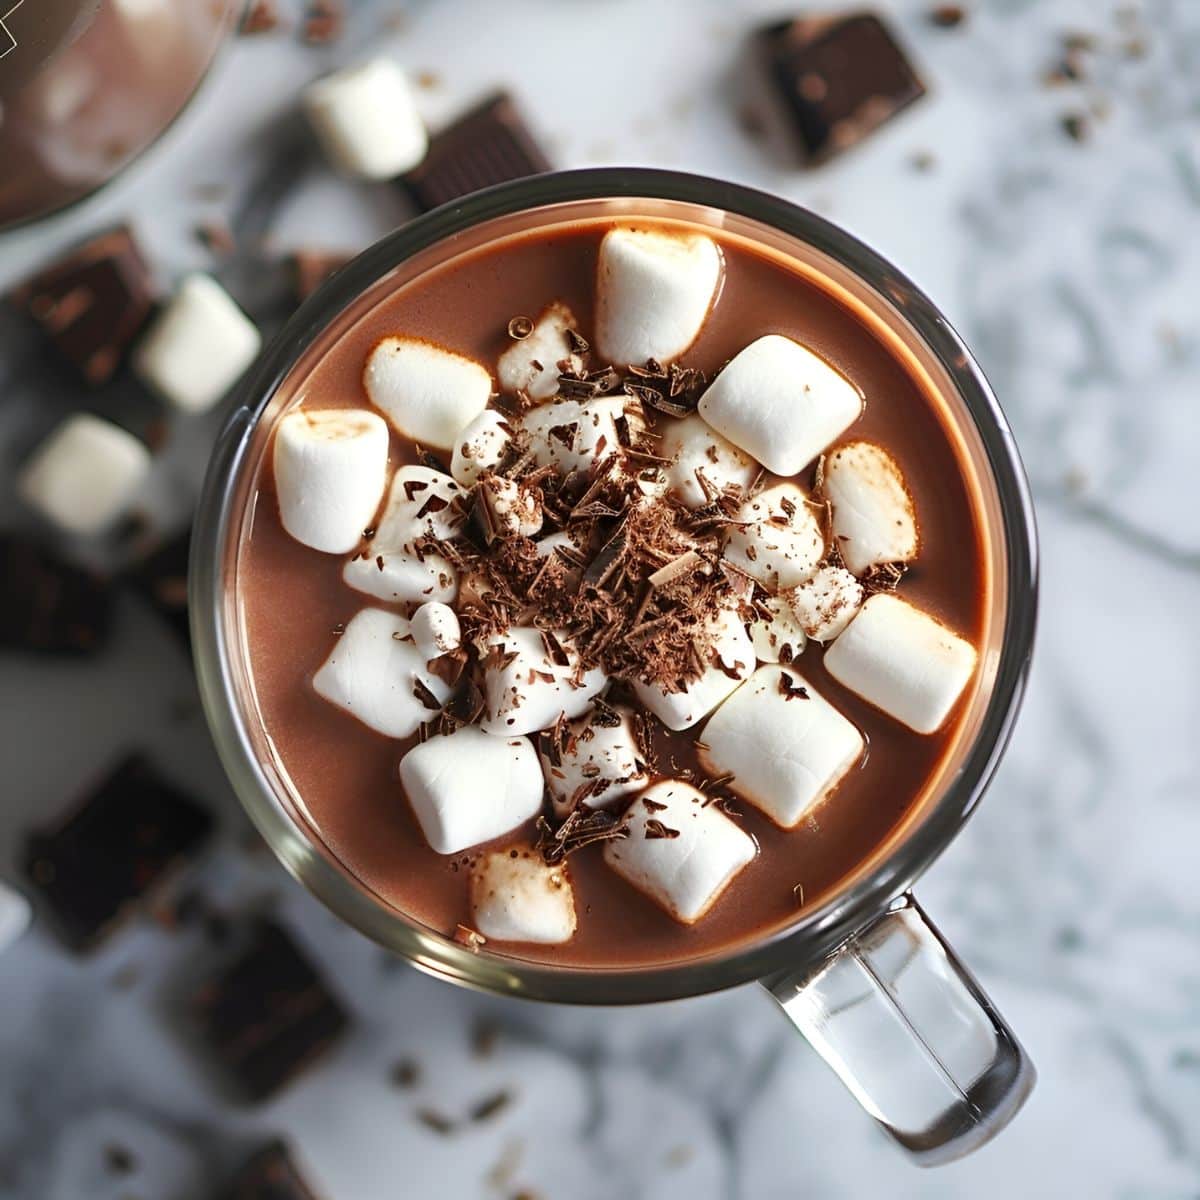 Top View Ghiradelli Hot Chocolate with Marshmallows and Chocolate Shavings